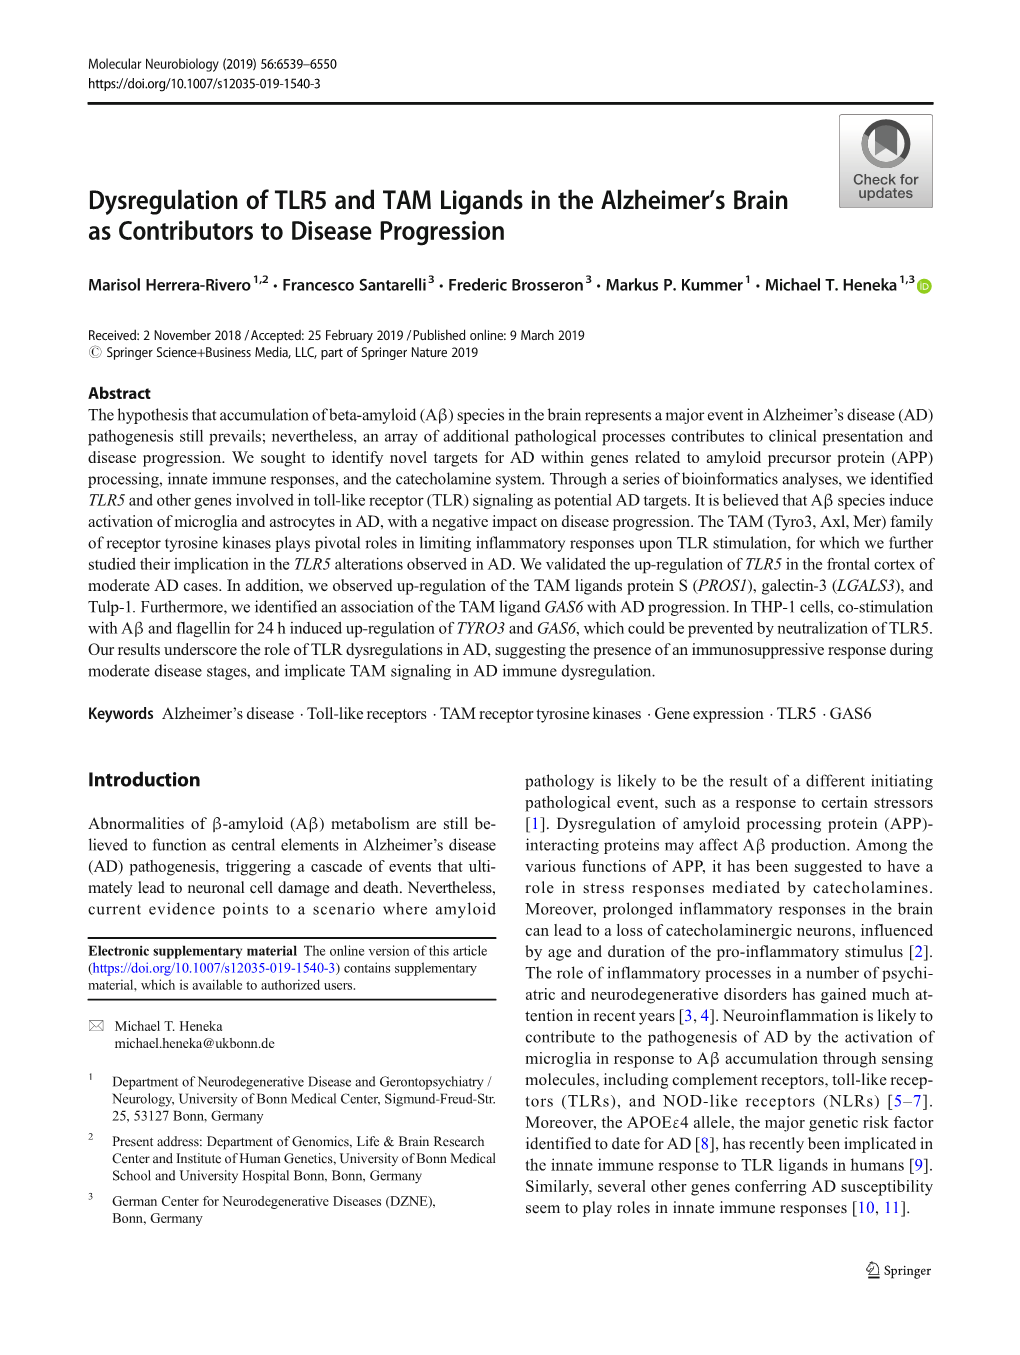 Dysregulation of TLR5 and TAM Ligands in the Alzheimer's Brain As